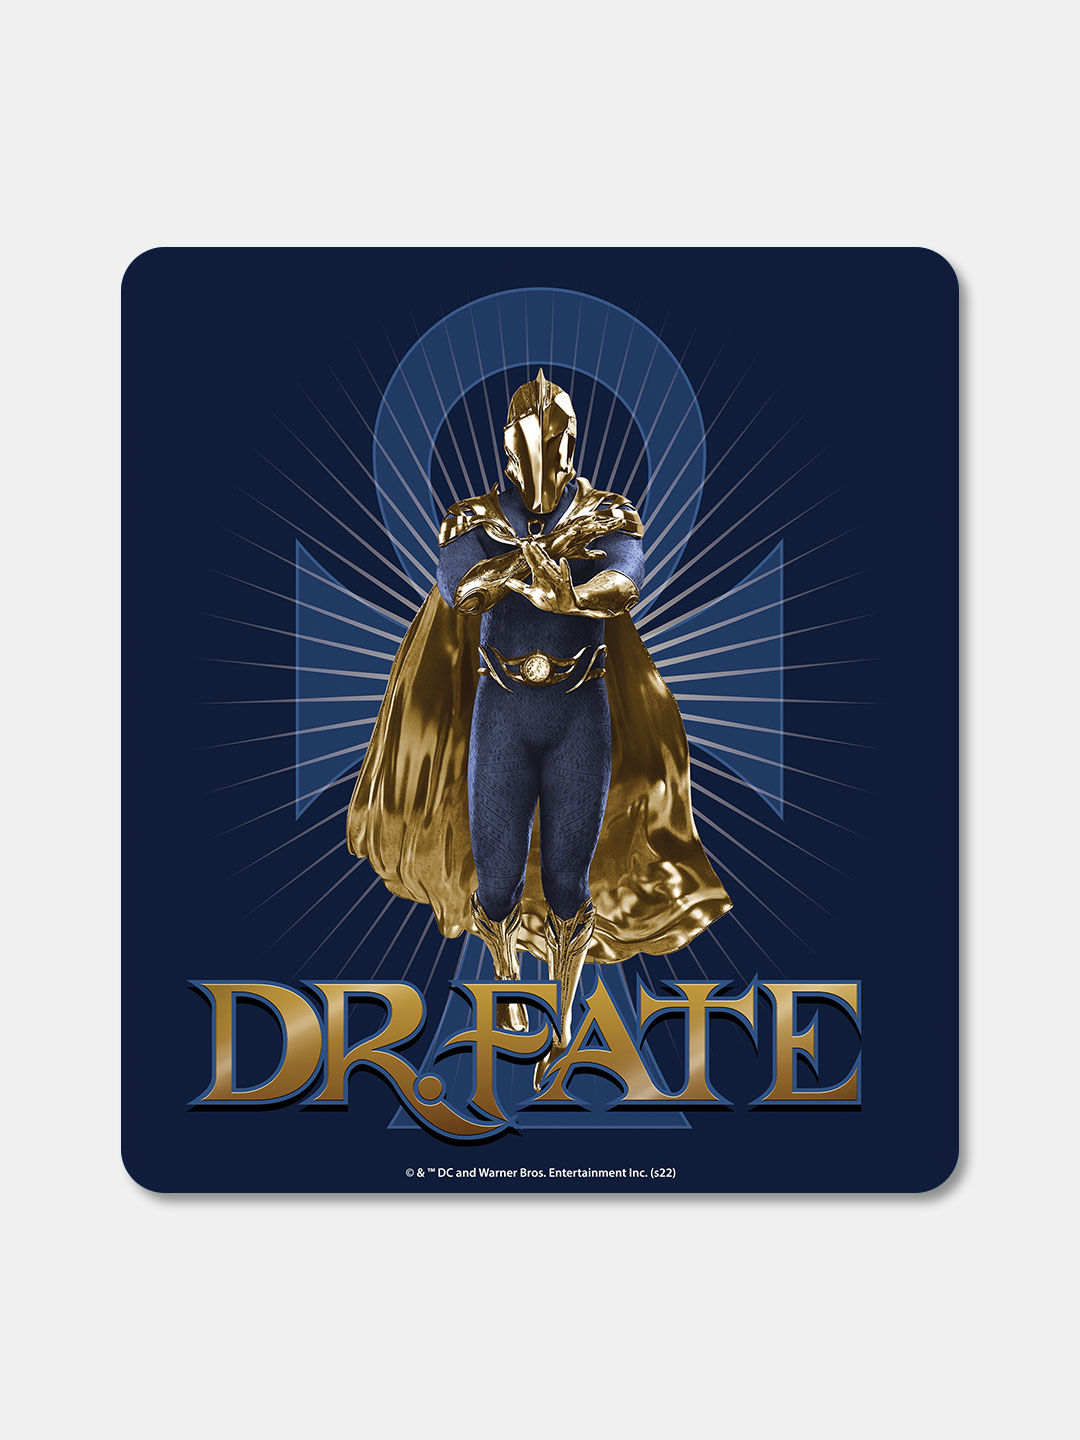 Buy Dr Fate - Macmerise Mouse Pad Mouse Pads Online